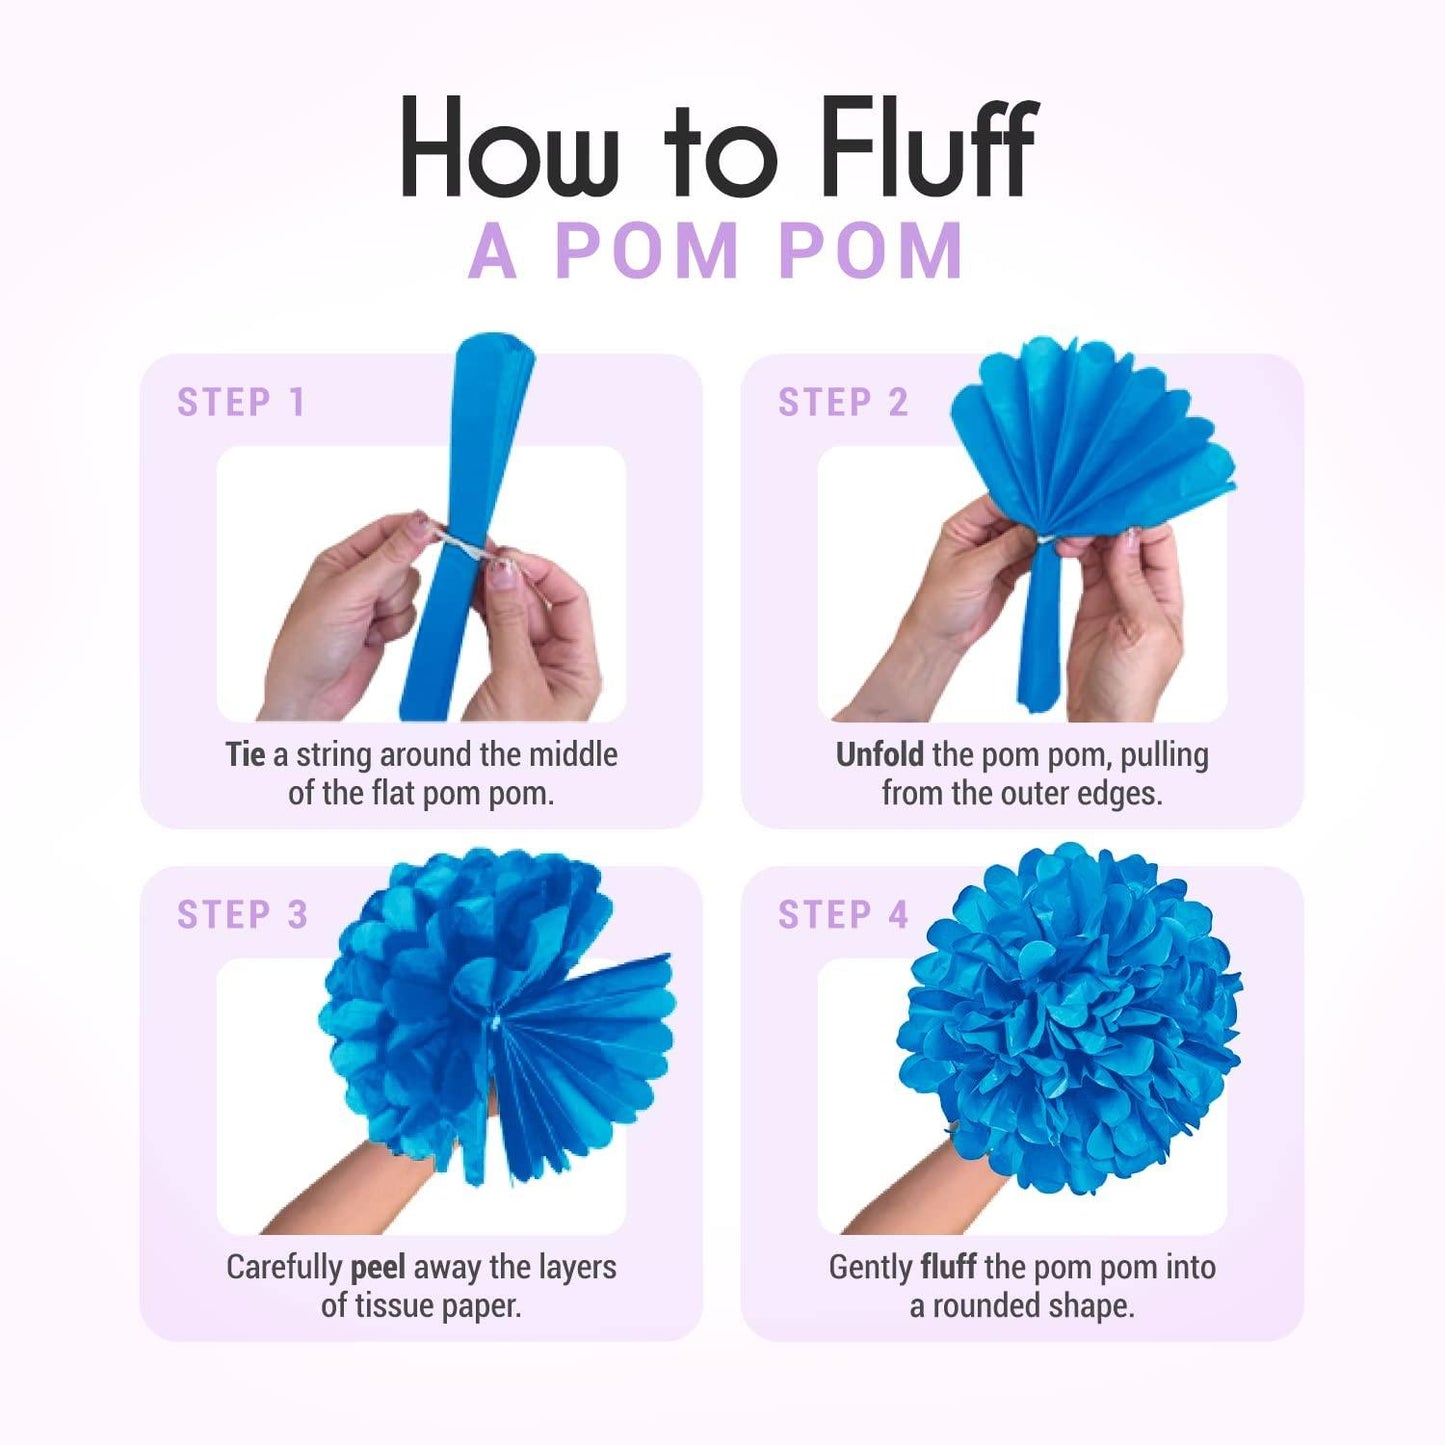 20 Pieces Tissue Paper Pom Poms Party Kit - If you say i do